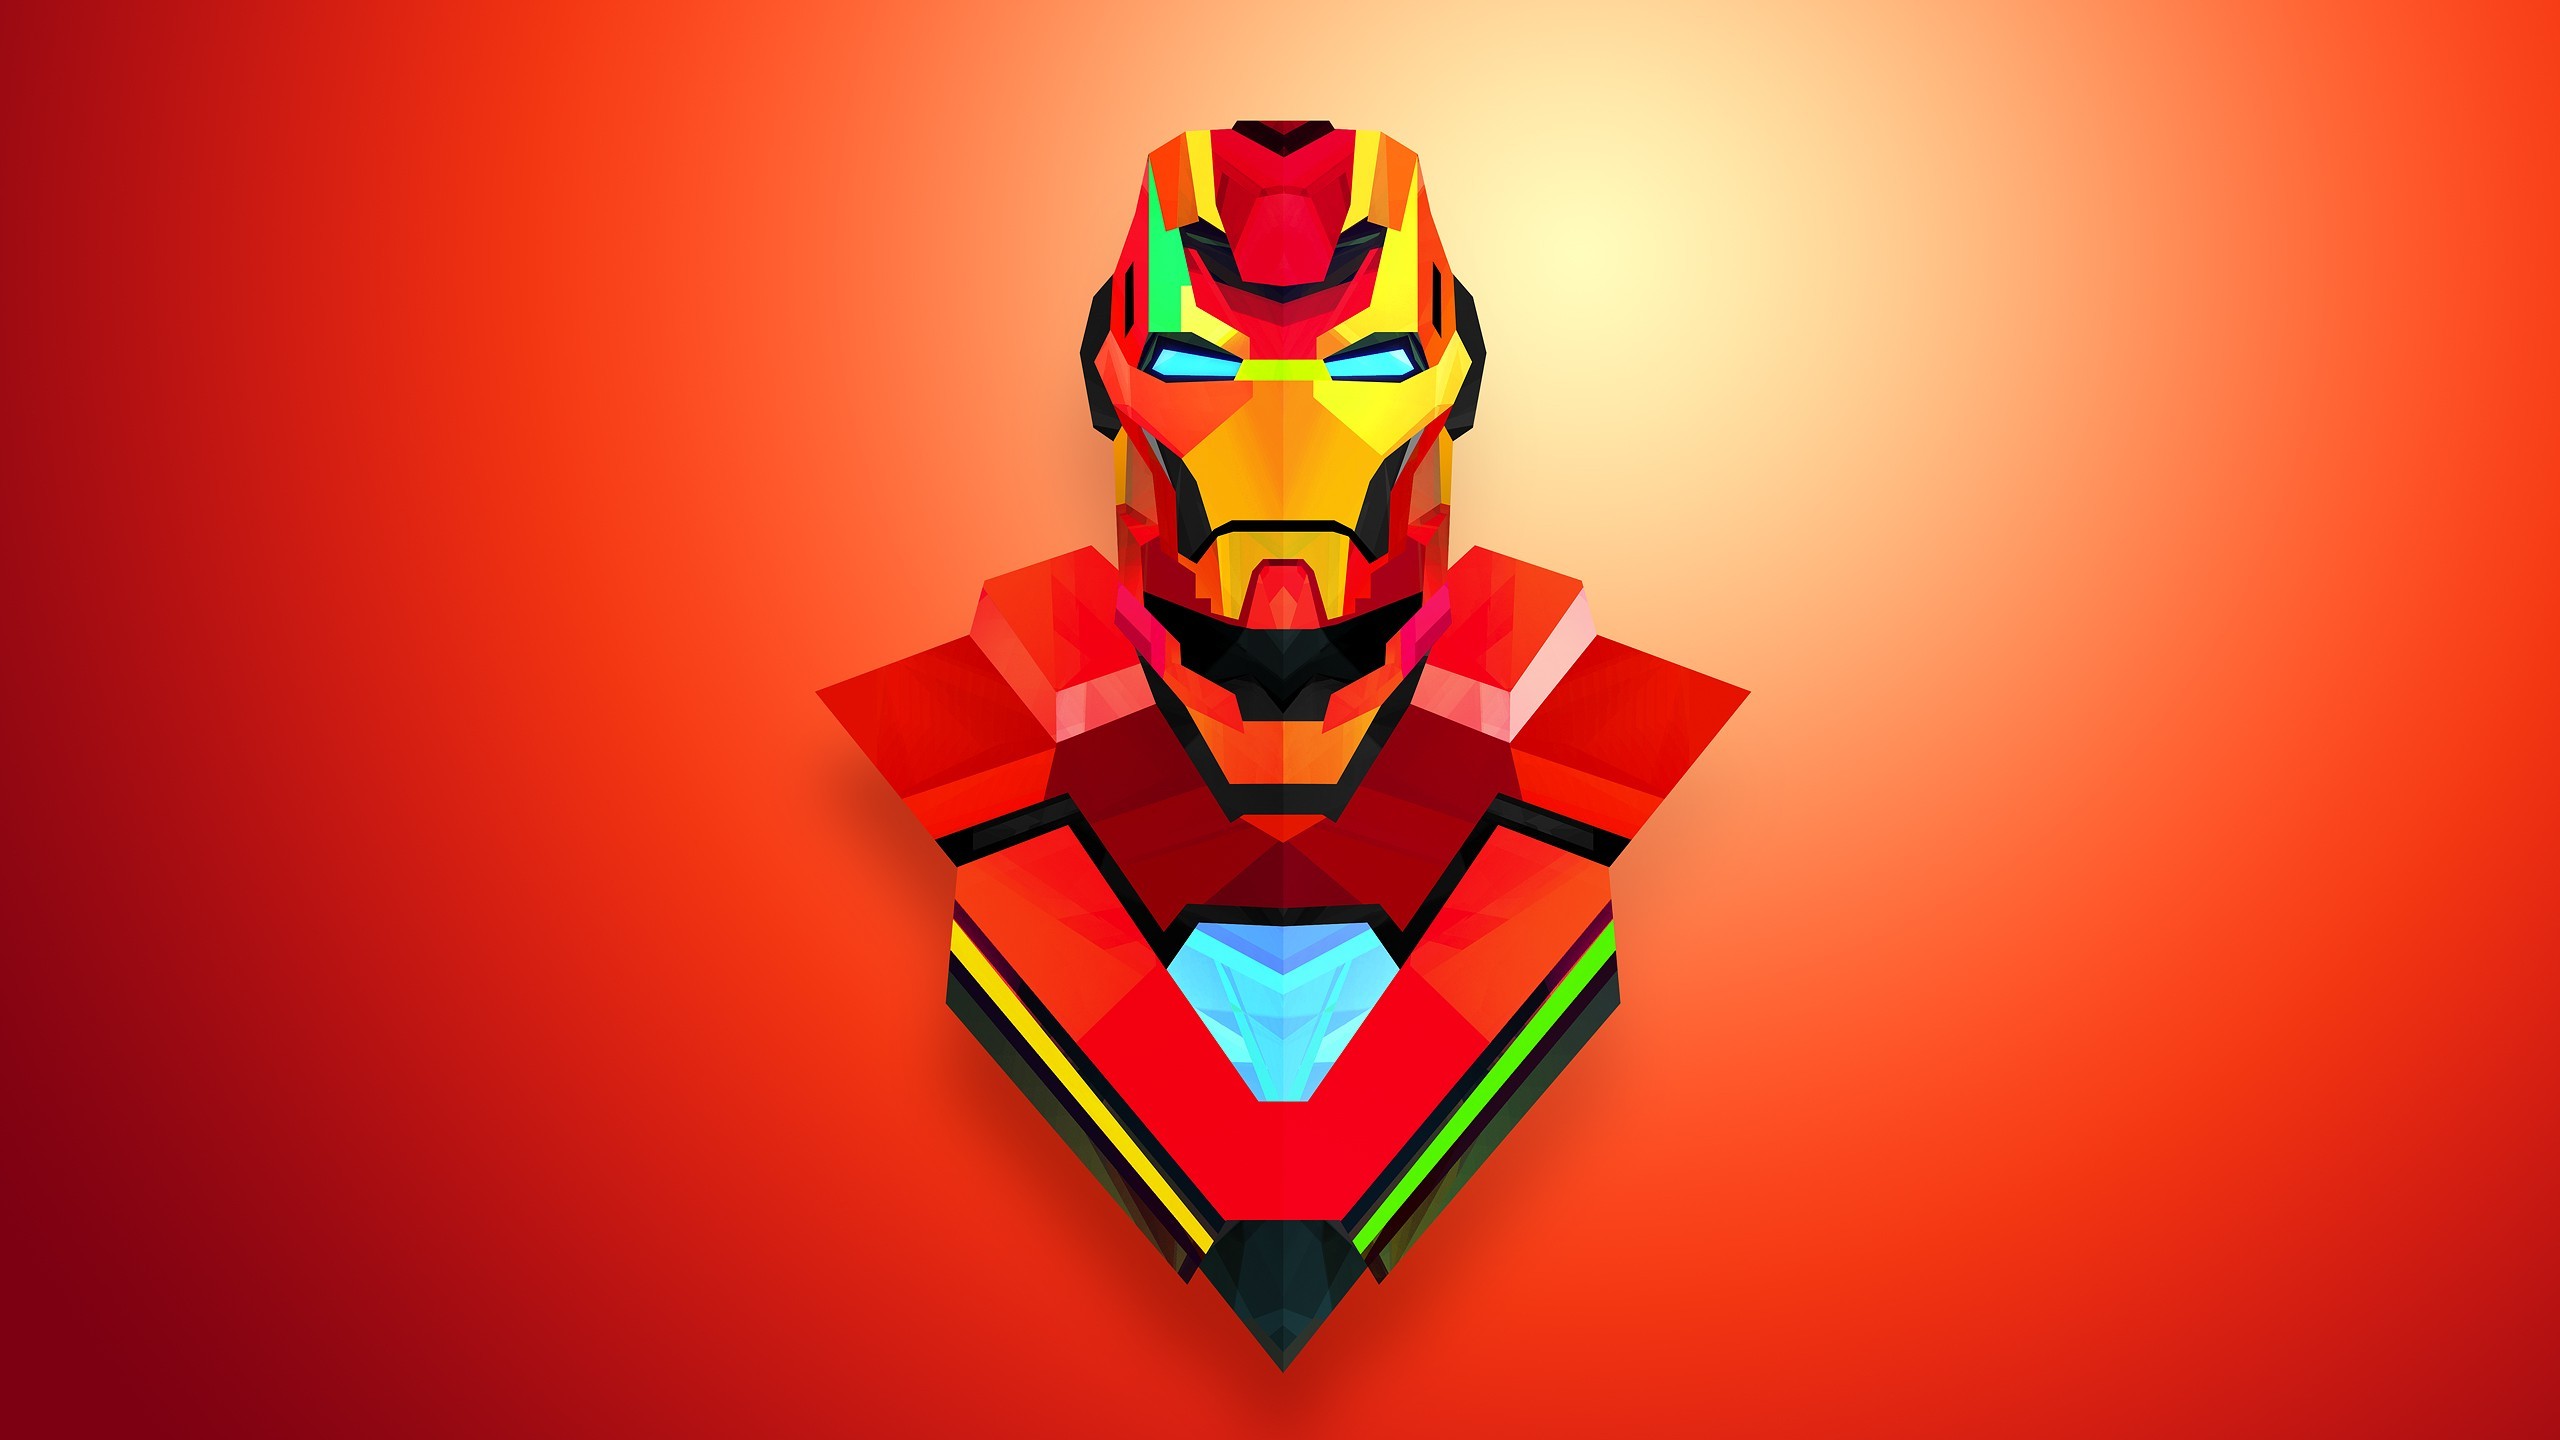 2560x1440 abstract, Iron Man, Red, Justin Maller